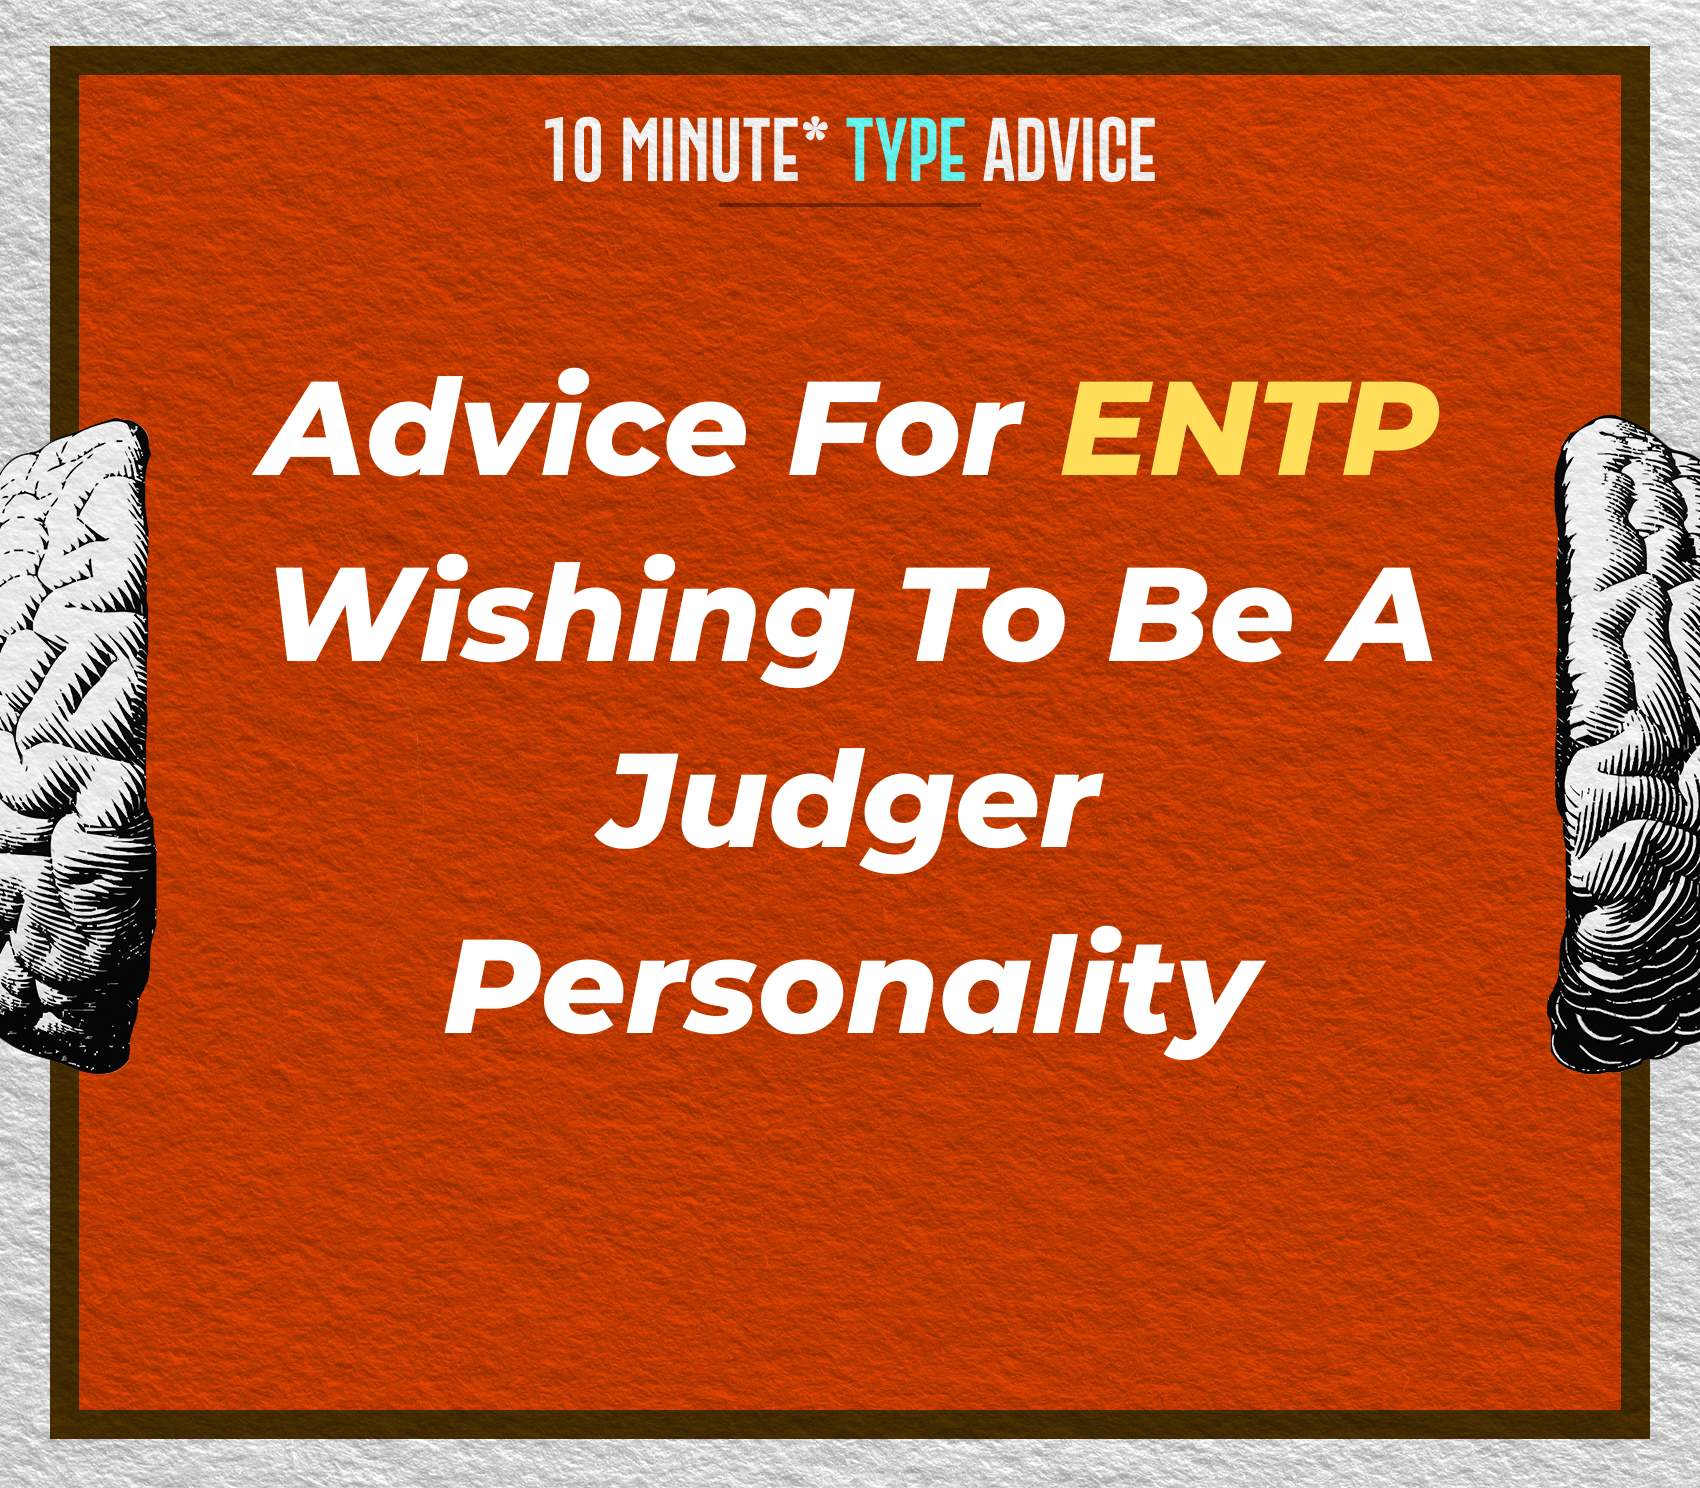 Advice For ENTP Wishing To Be A Judger Personality  | 10 Min Type Advice | S03:08